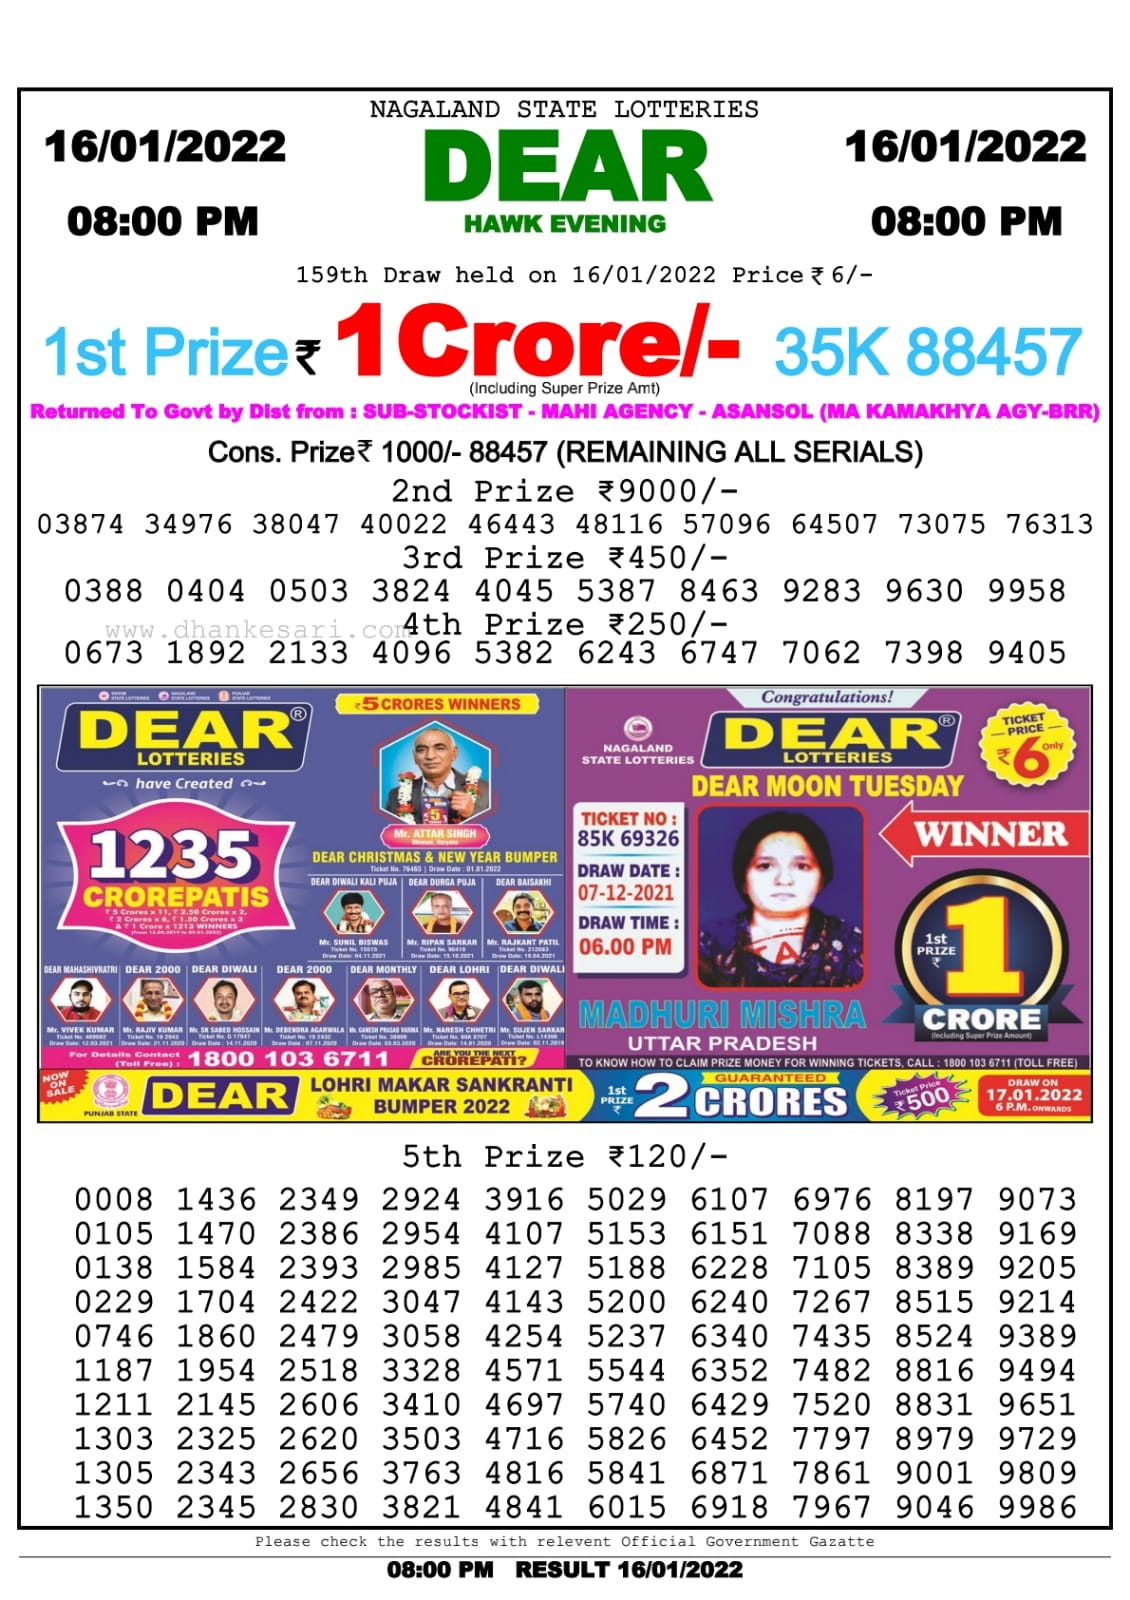 Dear Lottery Nagaland state Lottery Results 8.00 PM 16/01/2022